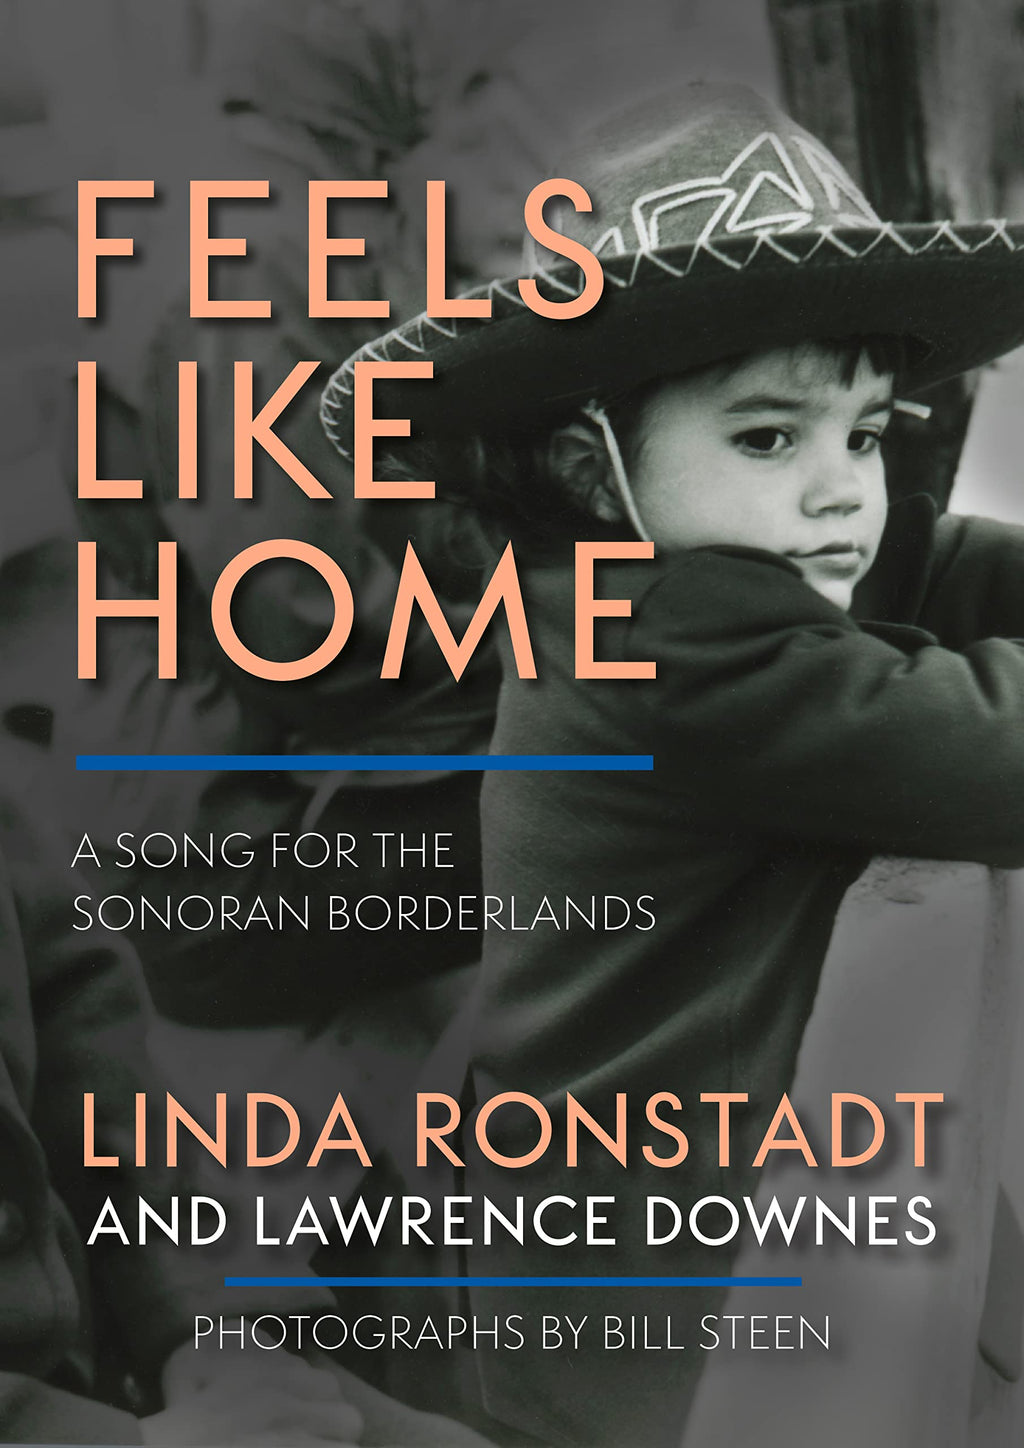 Feels Like Home: A Song for the Sonoran Boderlands